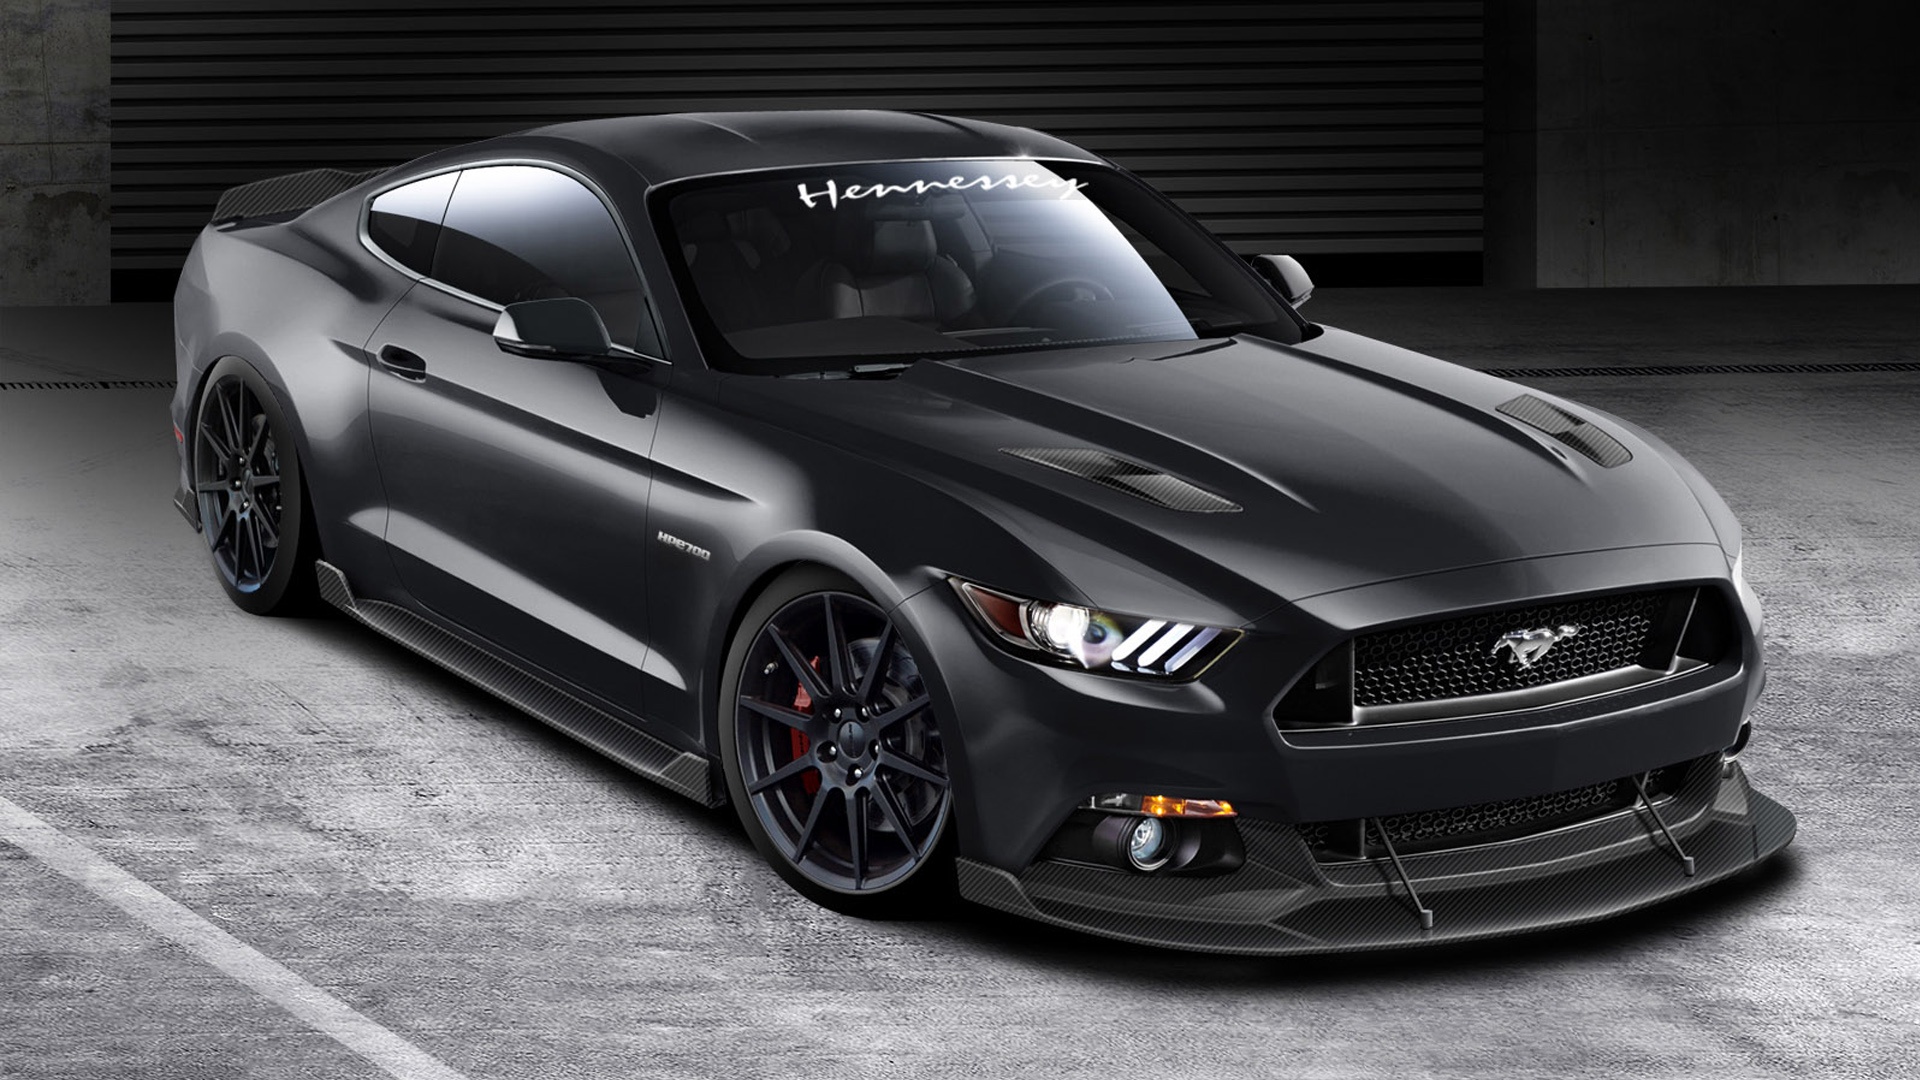 2015 Hennessey Ford Mustang GT Wallpaper HD Car Wallpapers